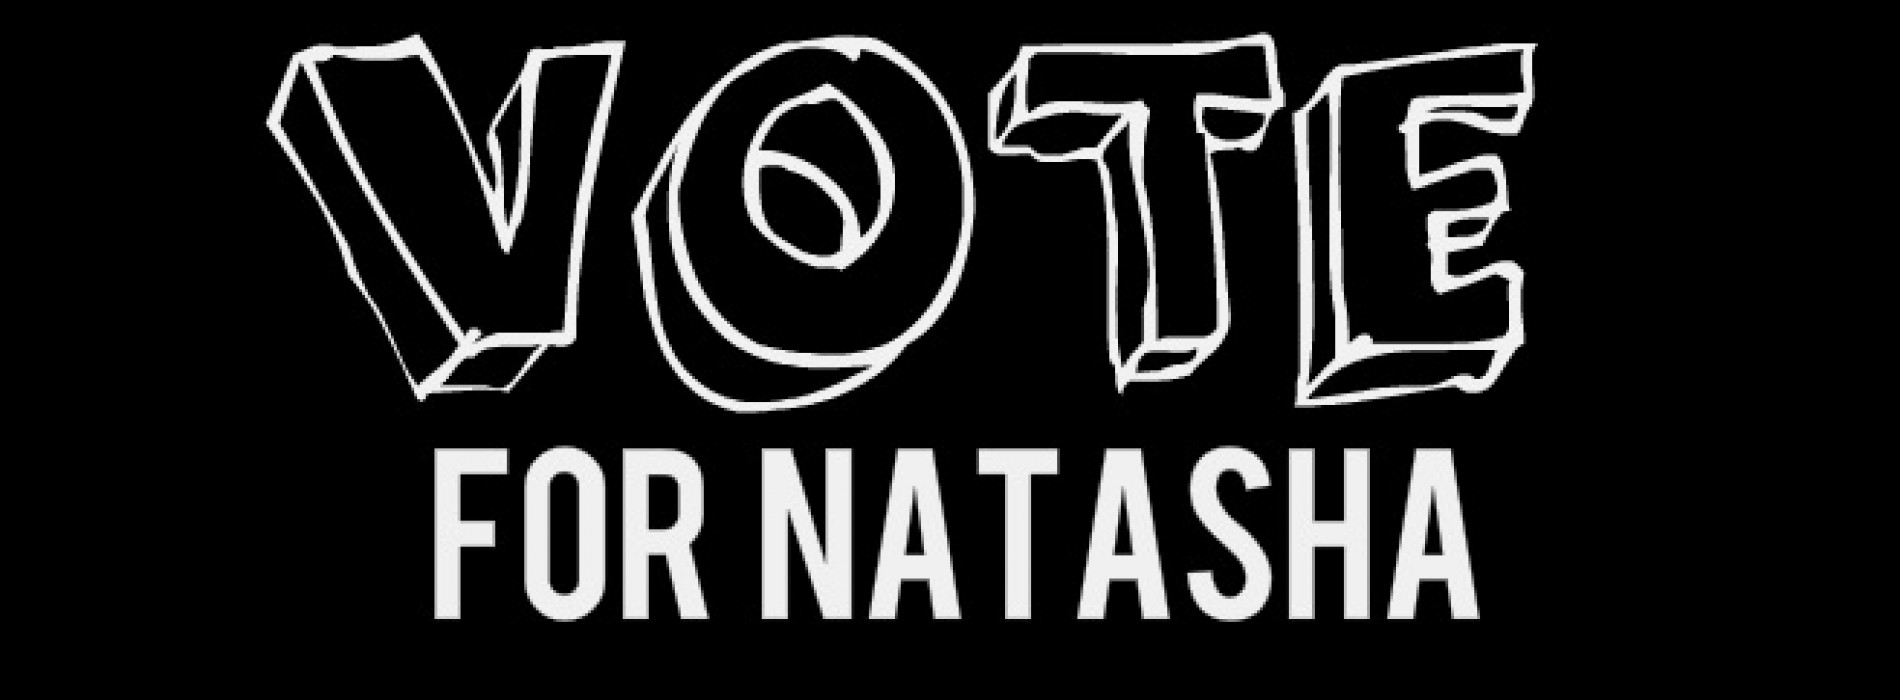 The Commonwealth Music Competition: Natasha Needs Your Votes